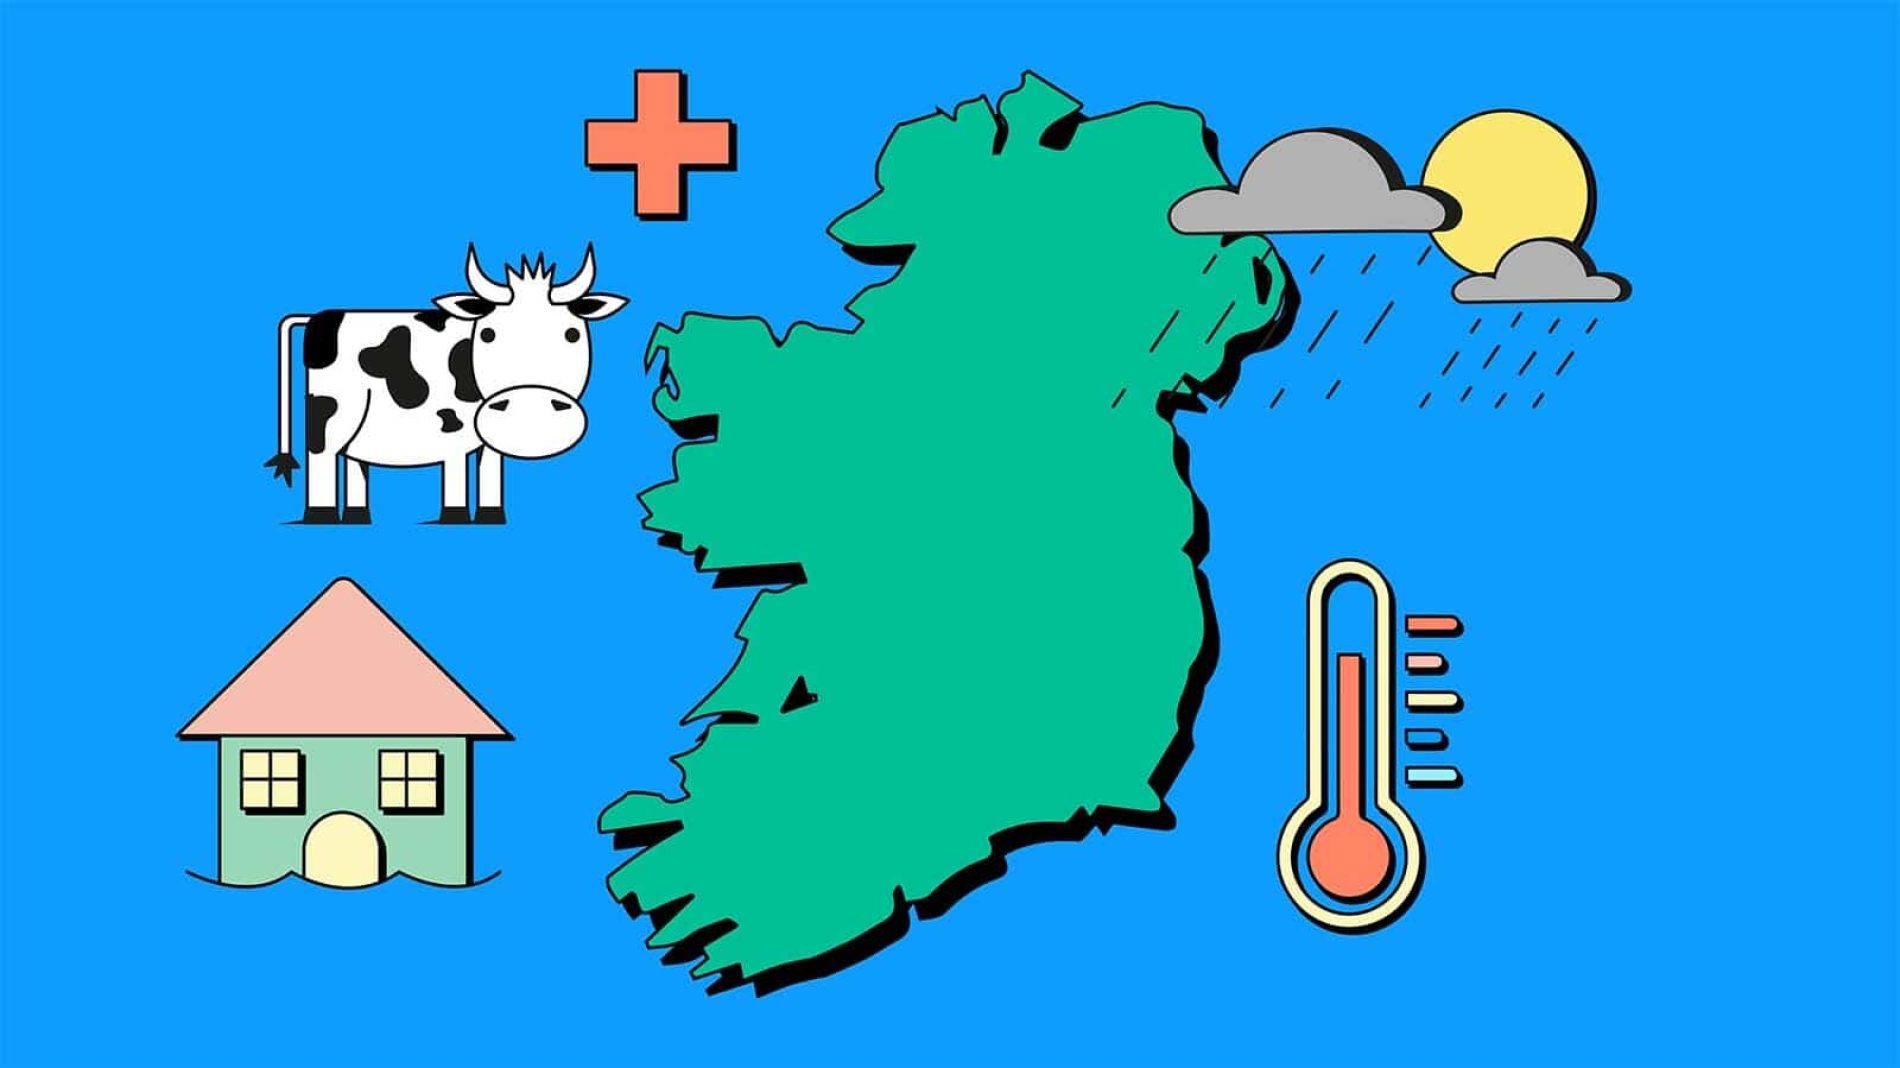 Illustration of ireland surrounded by a house, a cow, a thermometer and the sun and rain